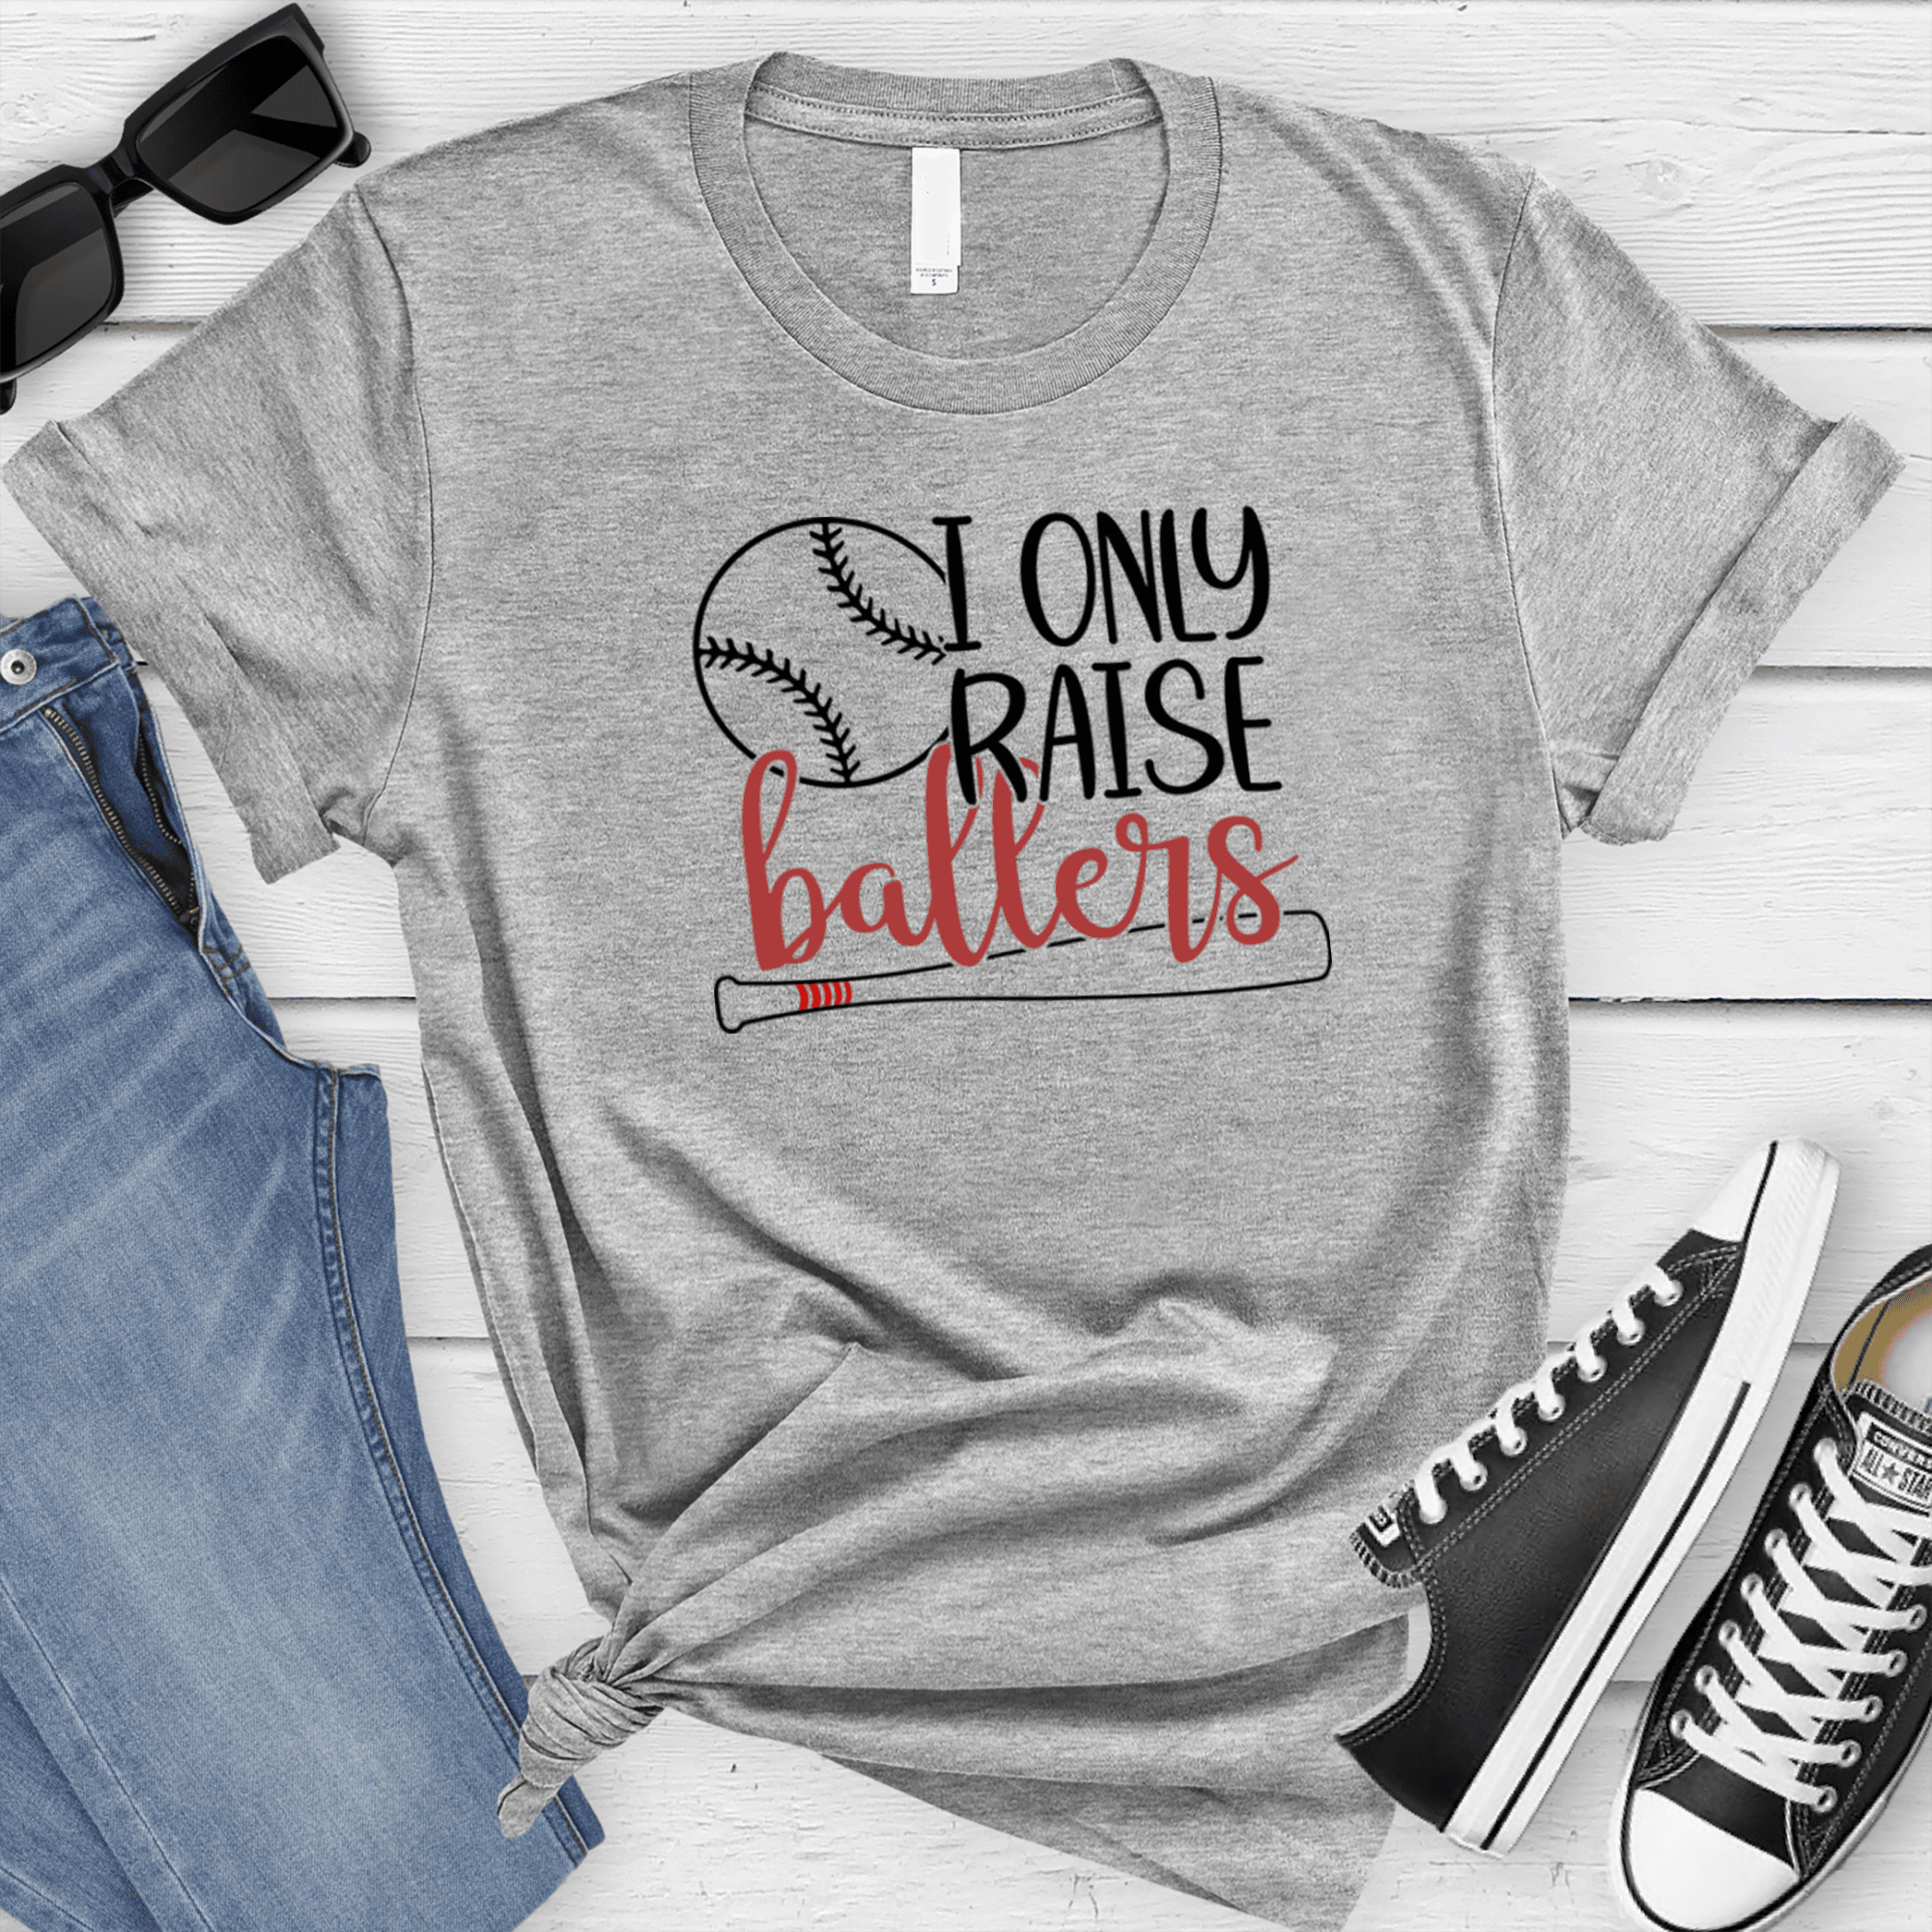 Womens Grey T Shirt with I-Only-Raise-Ballers design